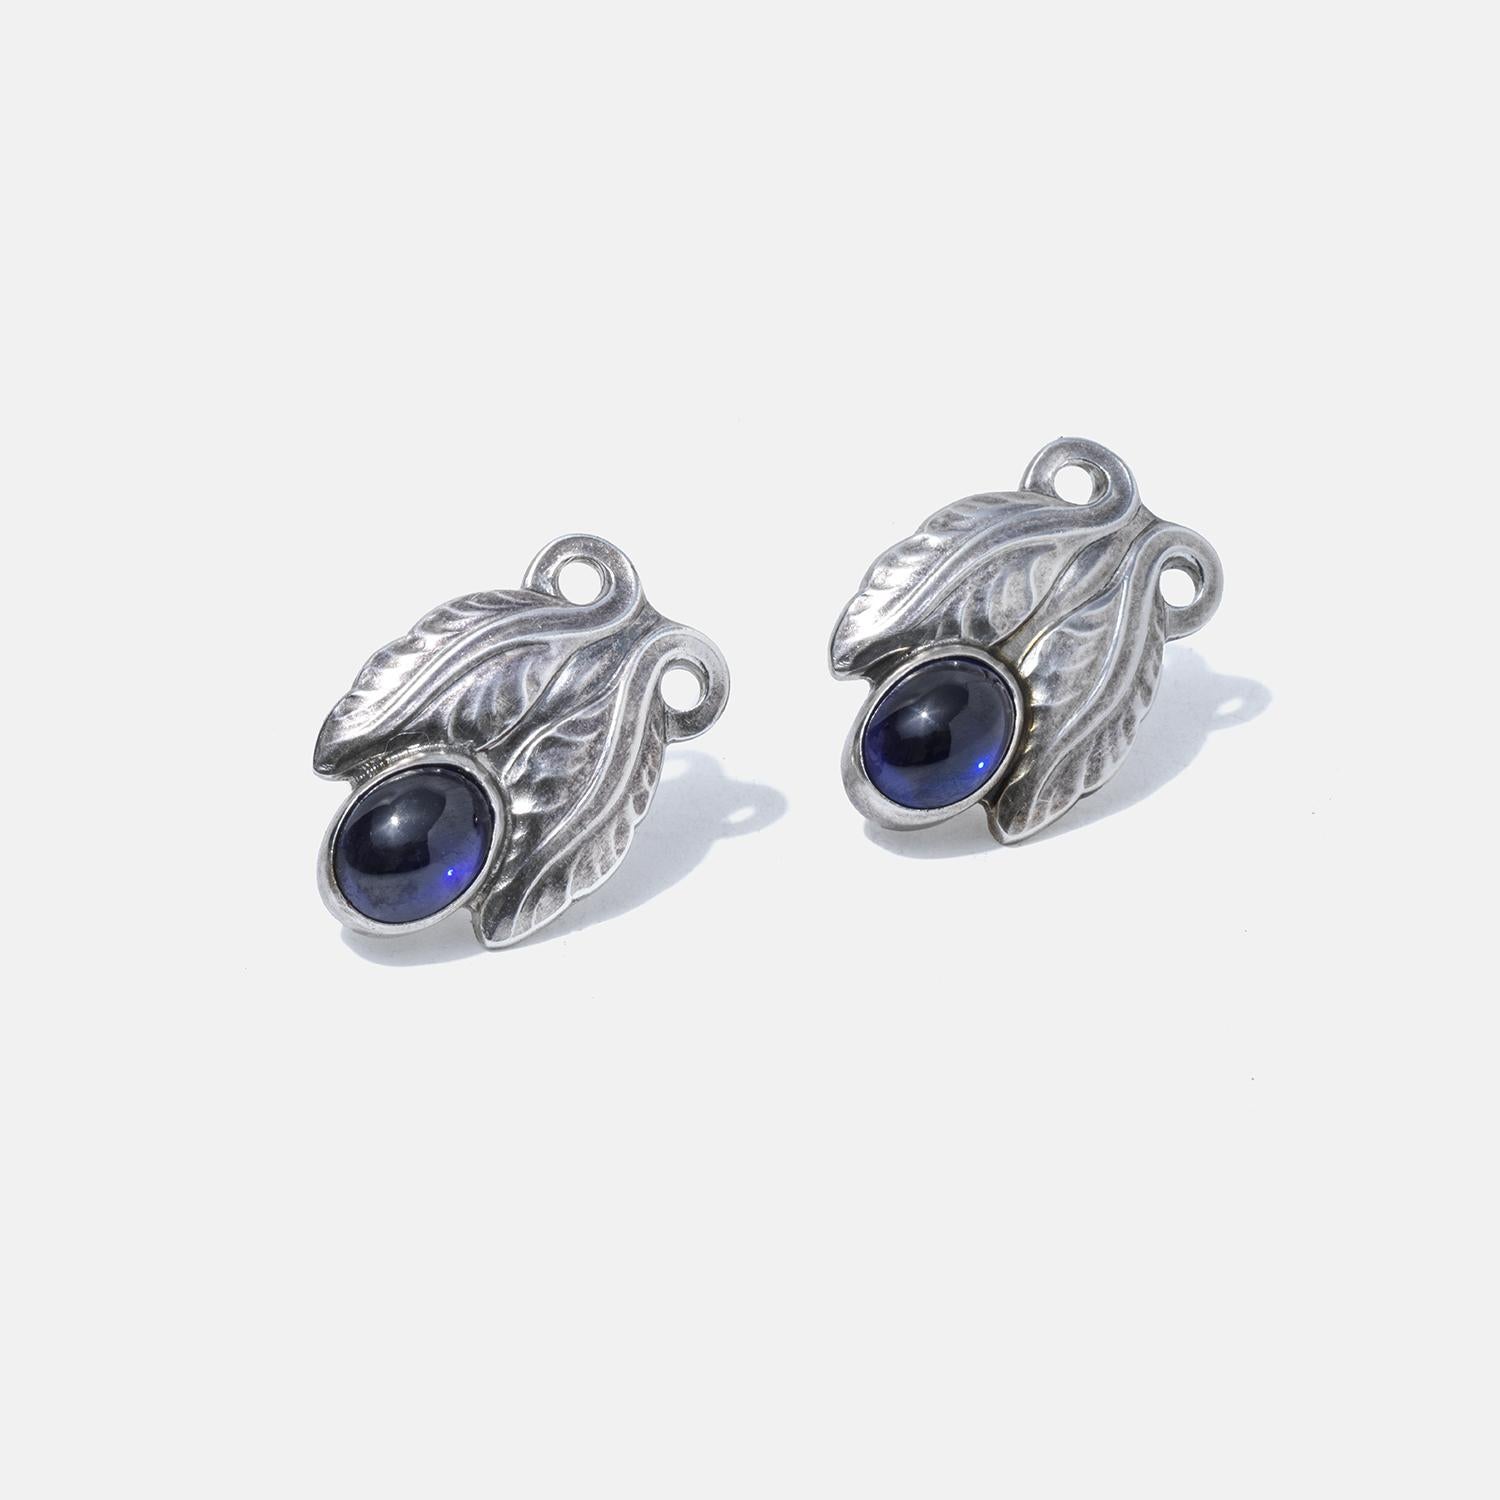 These sterling silver earrings feature deep blue stones nestled within leaf-like designs, adding a touch of nature-inspired elegance. The intricate leaf patterns cradle the stones, reflecting a vintage aesthetic. The earrings are designed with screw